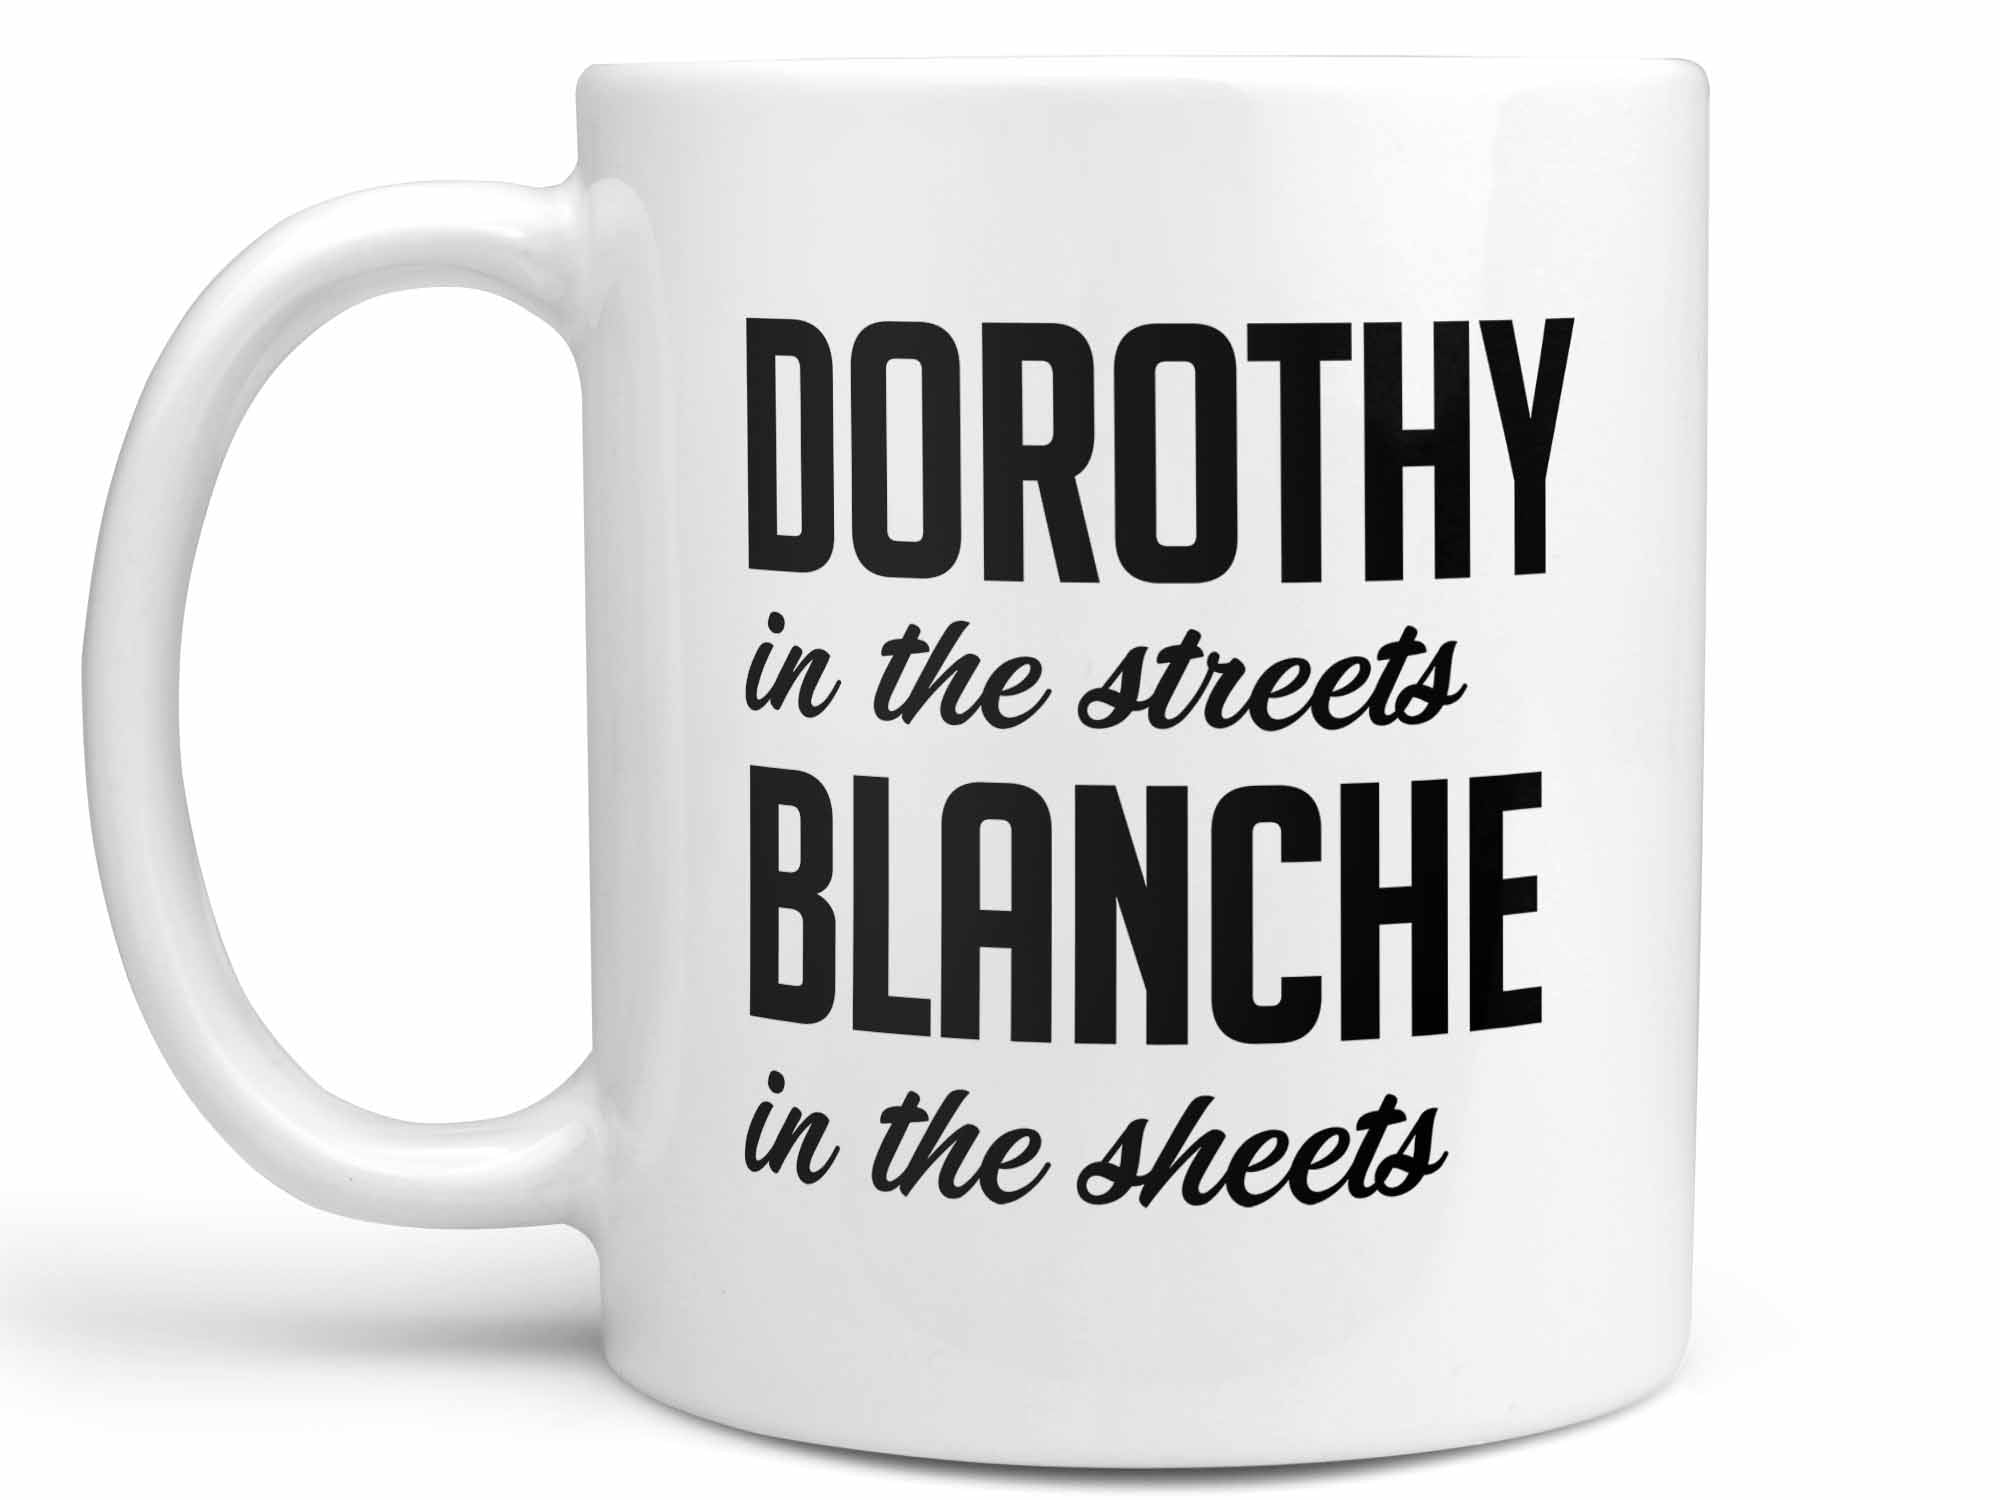 Blanche In the Sheets Coffee Mug